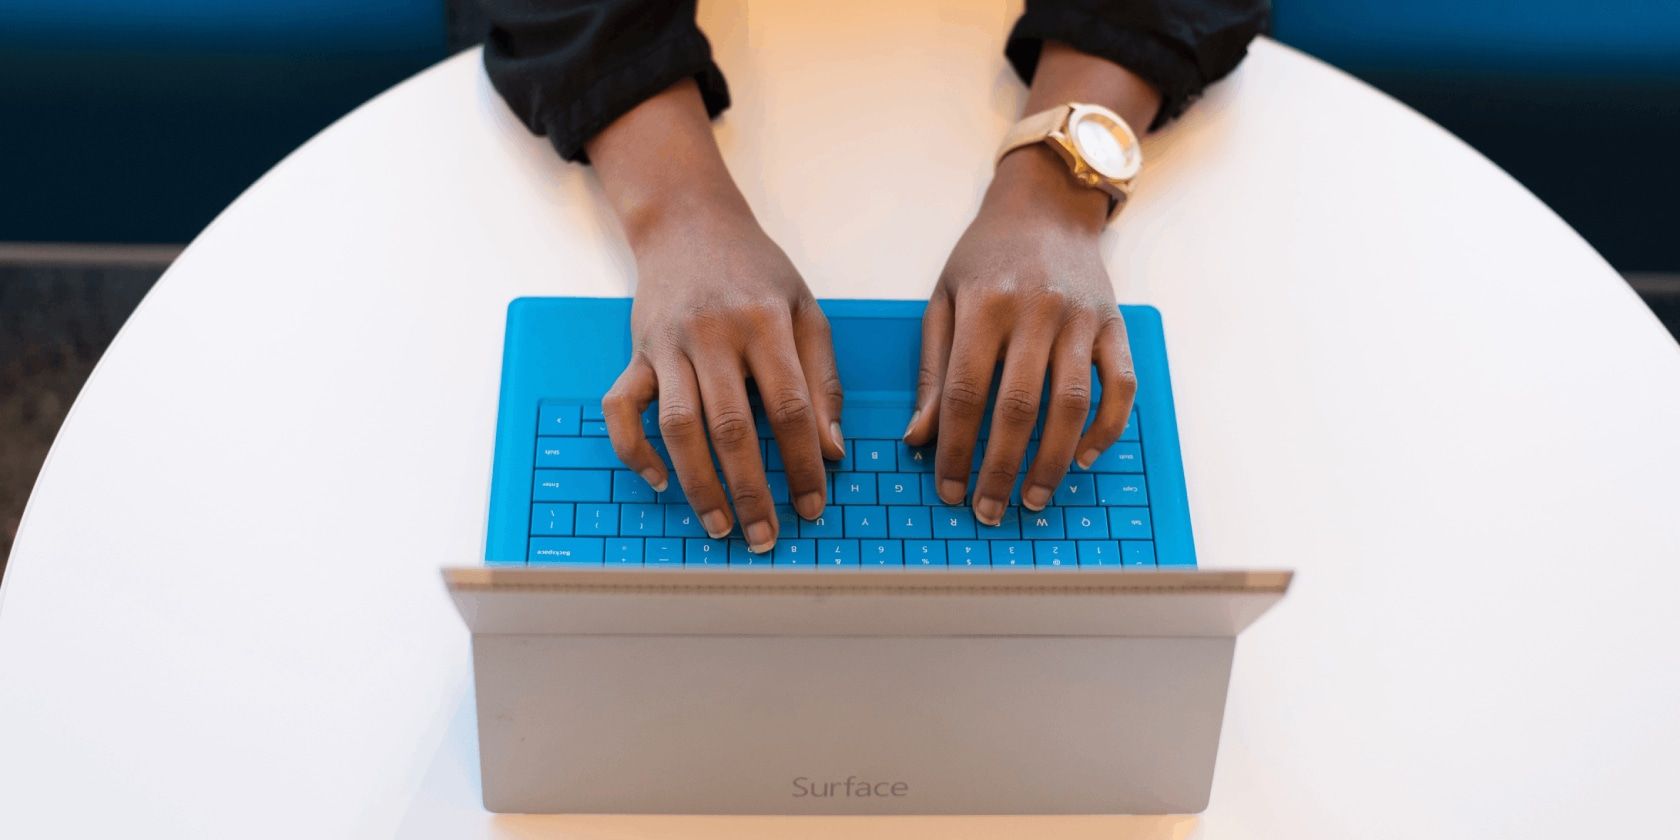 Hands typing on the vivd blue keyboard of a Surface tablet